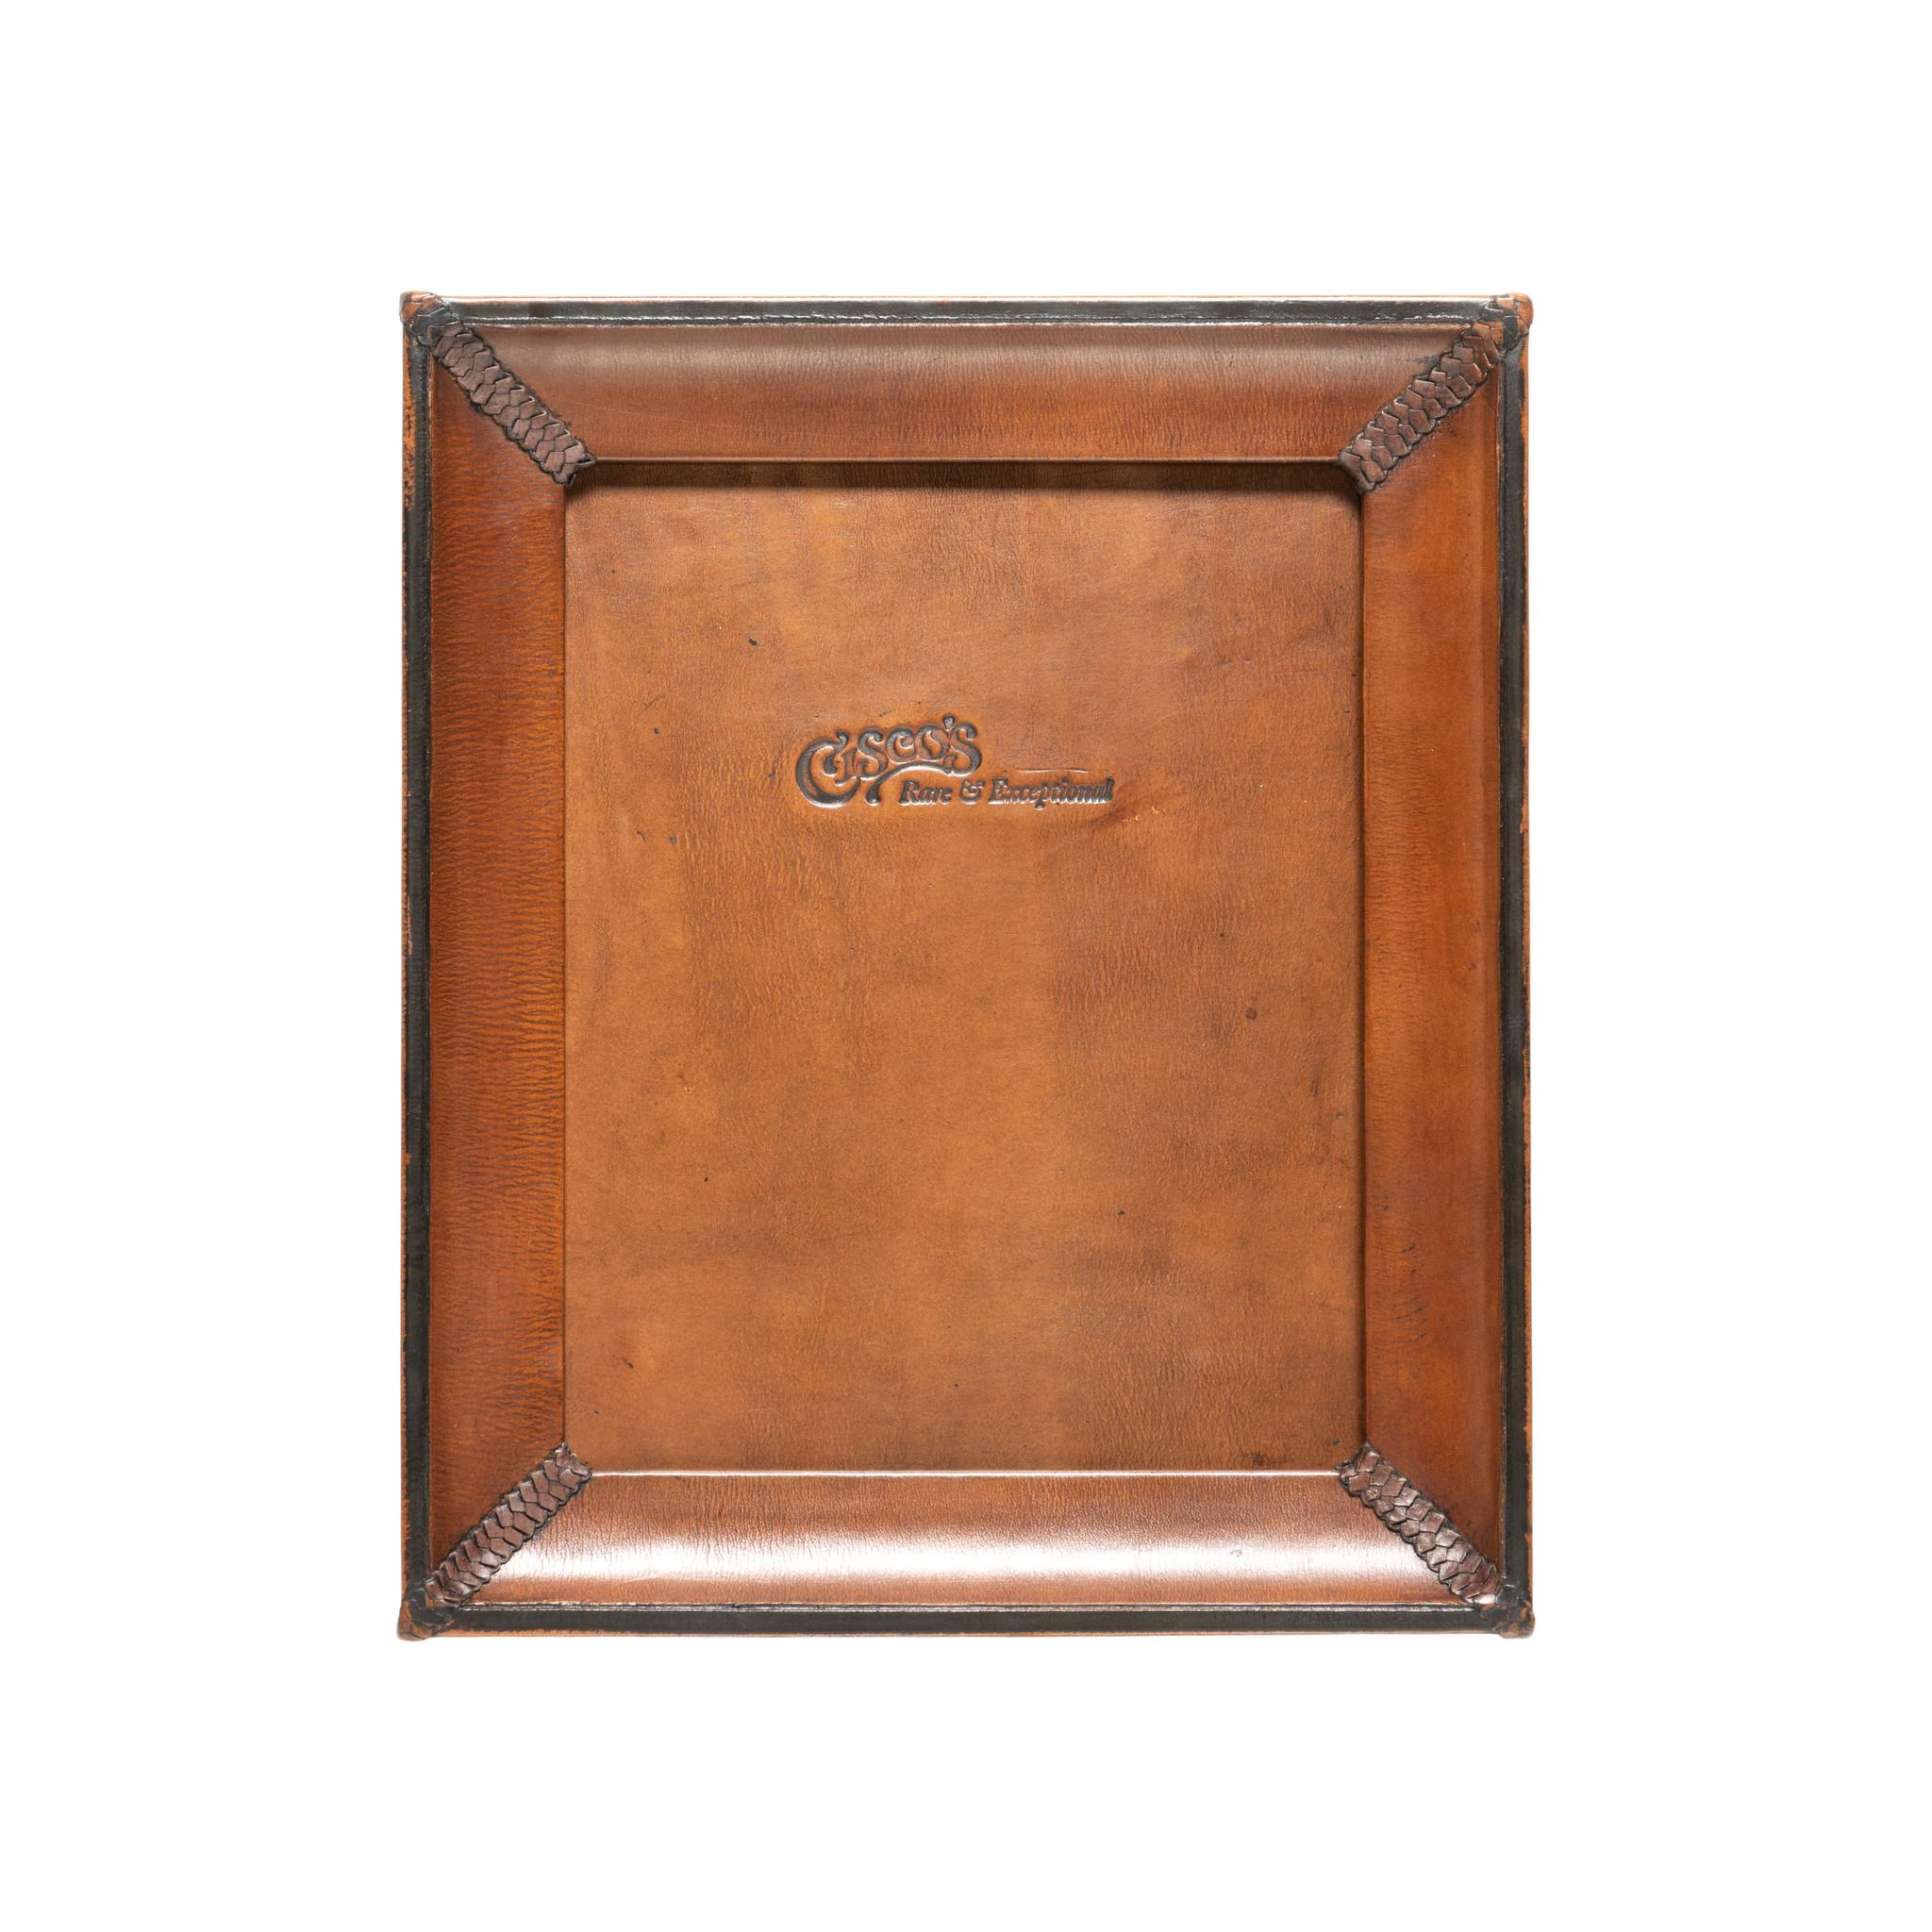 5x7 Medium Brown and Black Leather Tabletop Picture Frame - The Artisan In New Condition For Sale In Coeur d'Alene, ID